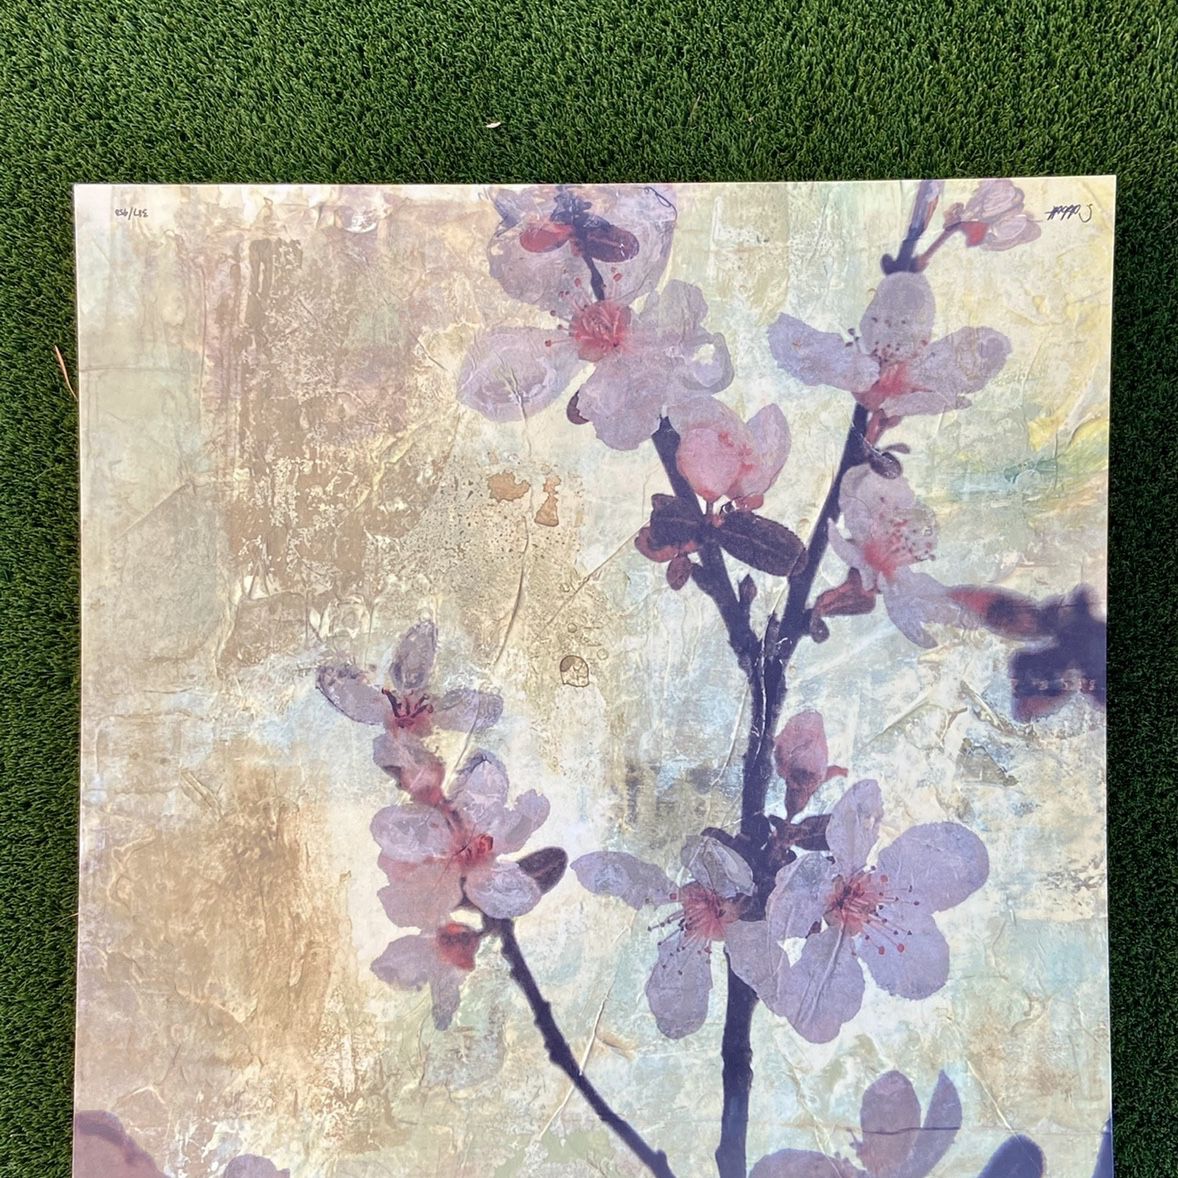 Floral Canvas Painting